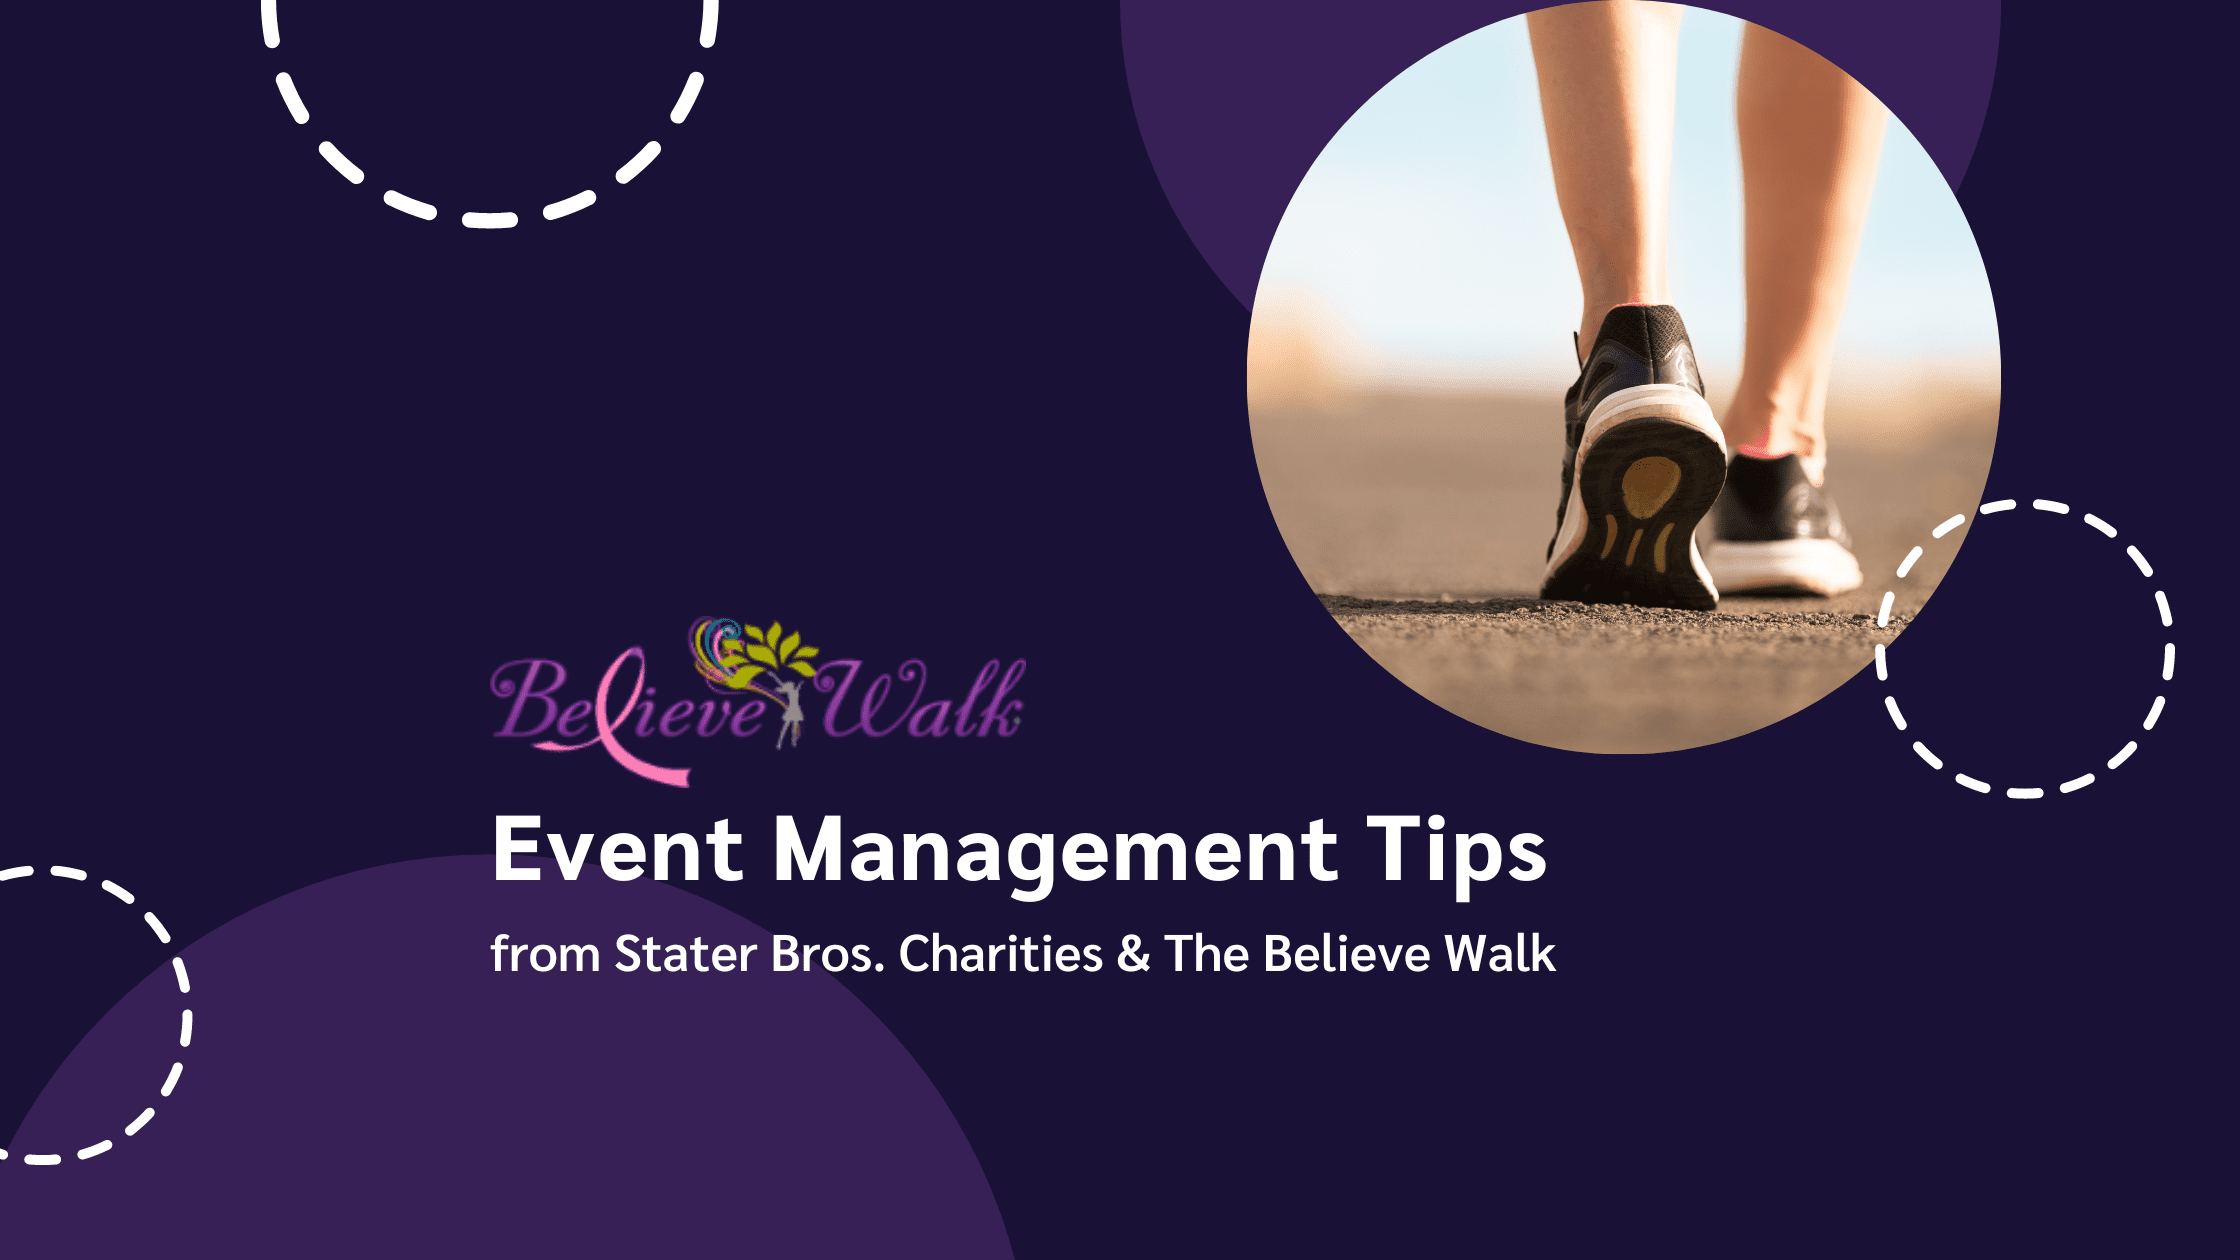 Believe Walk Stater Bros. Charities logo with article text "Event Management Tips".